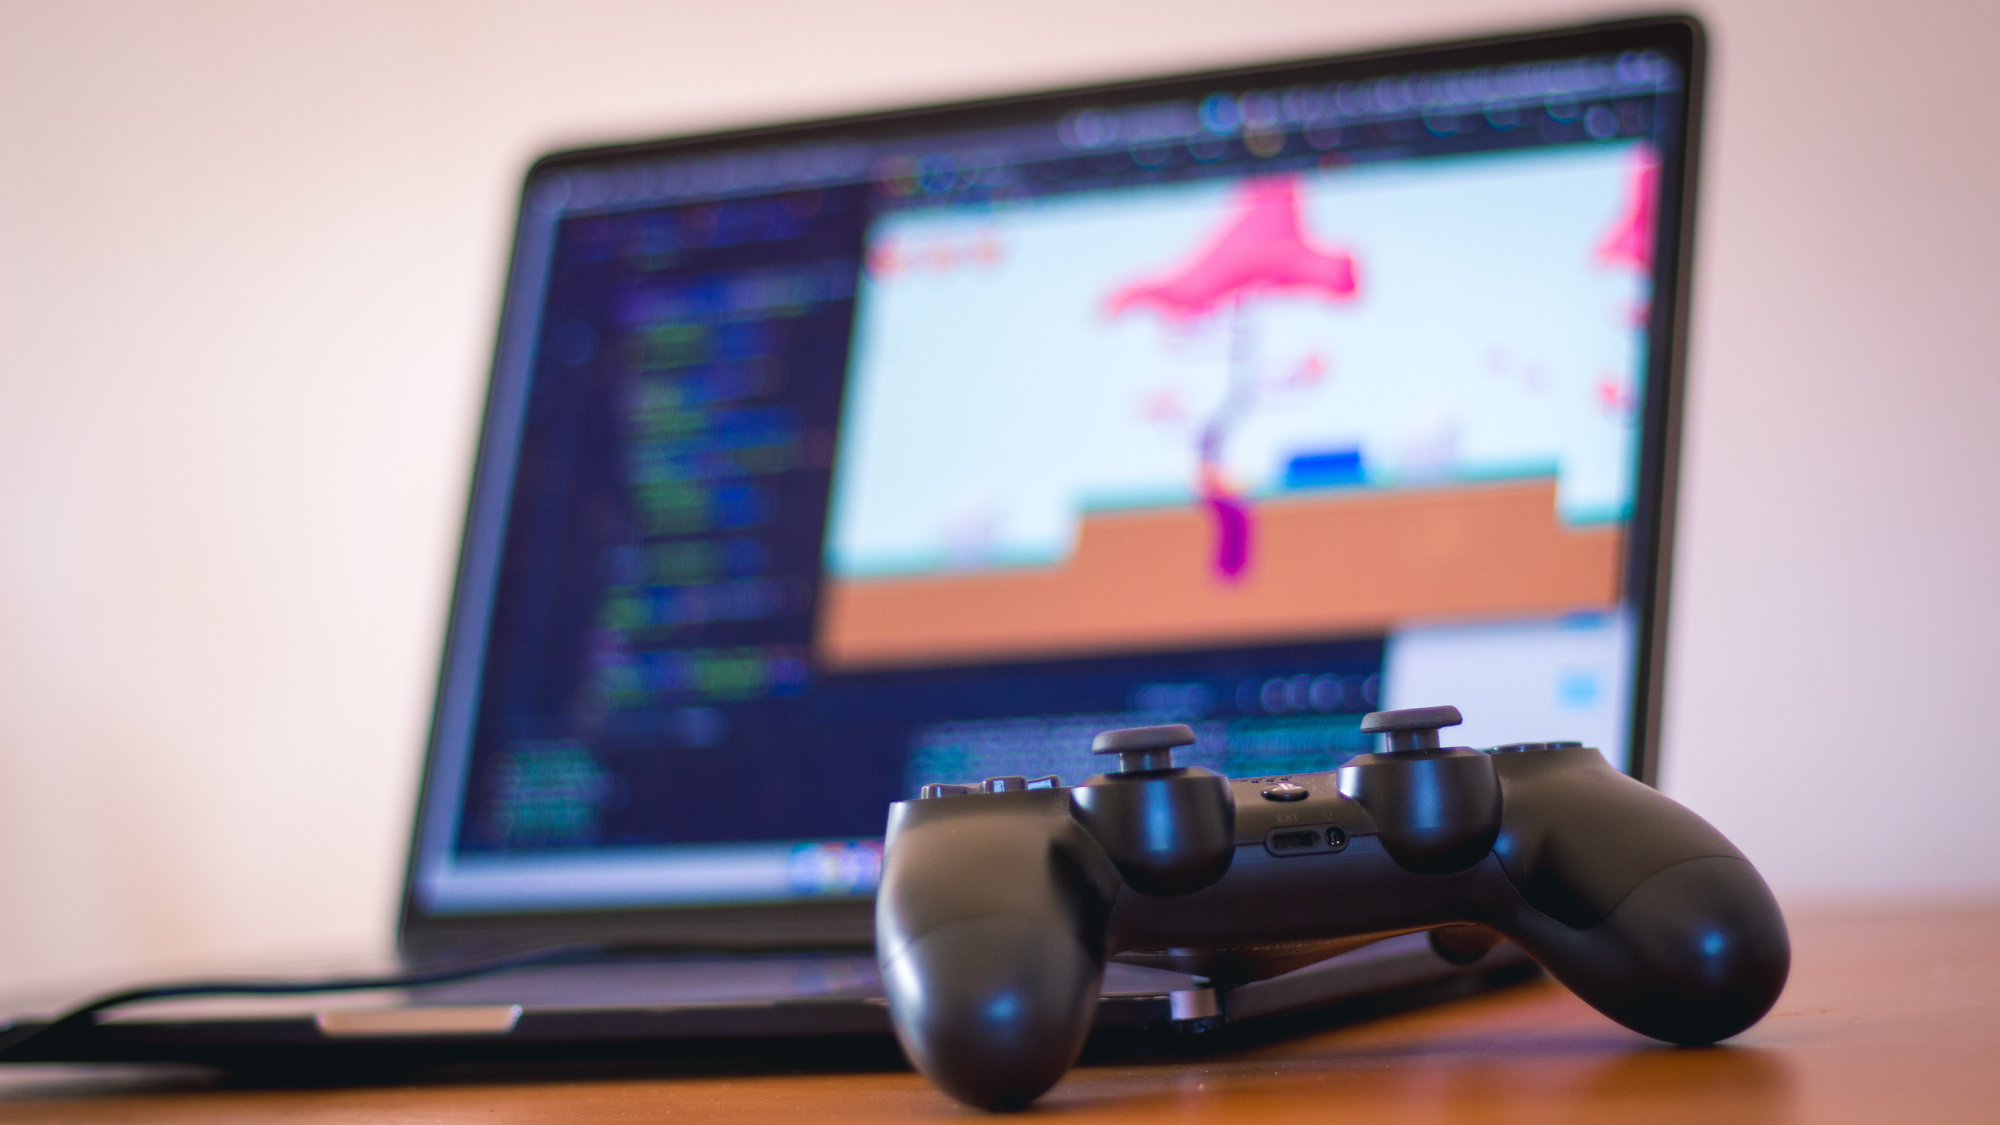 It’s surprisingly easy to connect your favorite video game controllers to your Mac